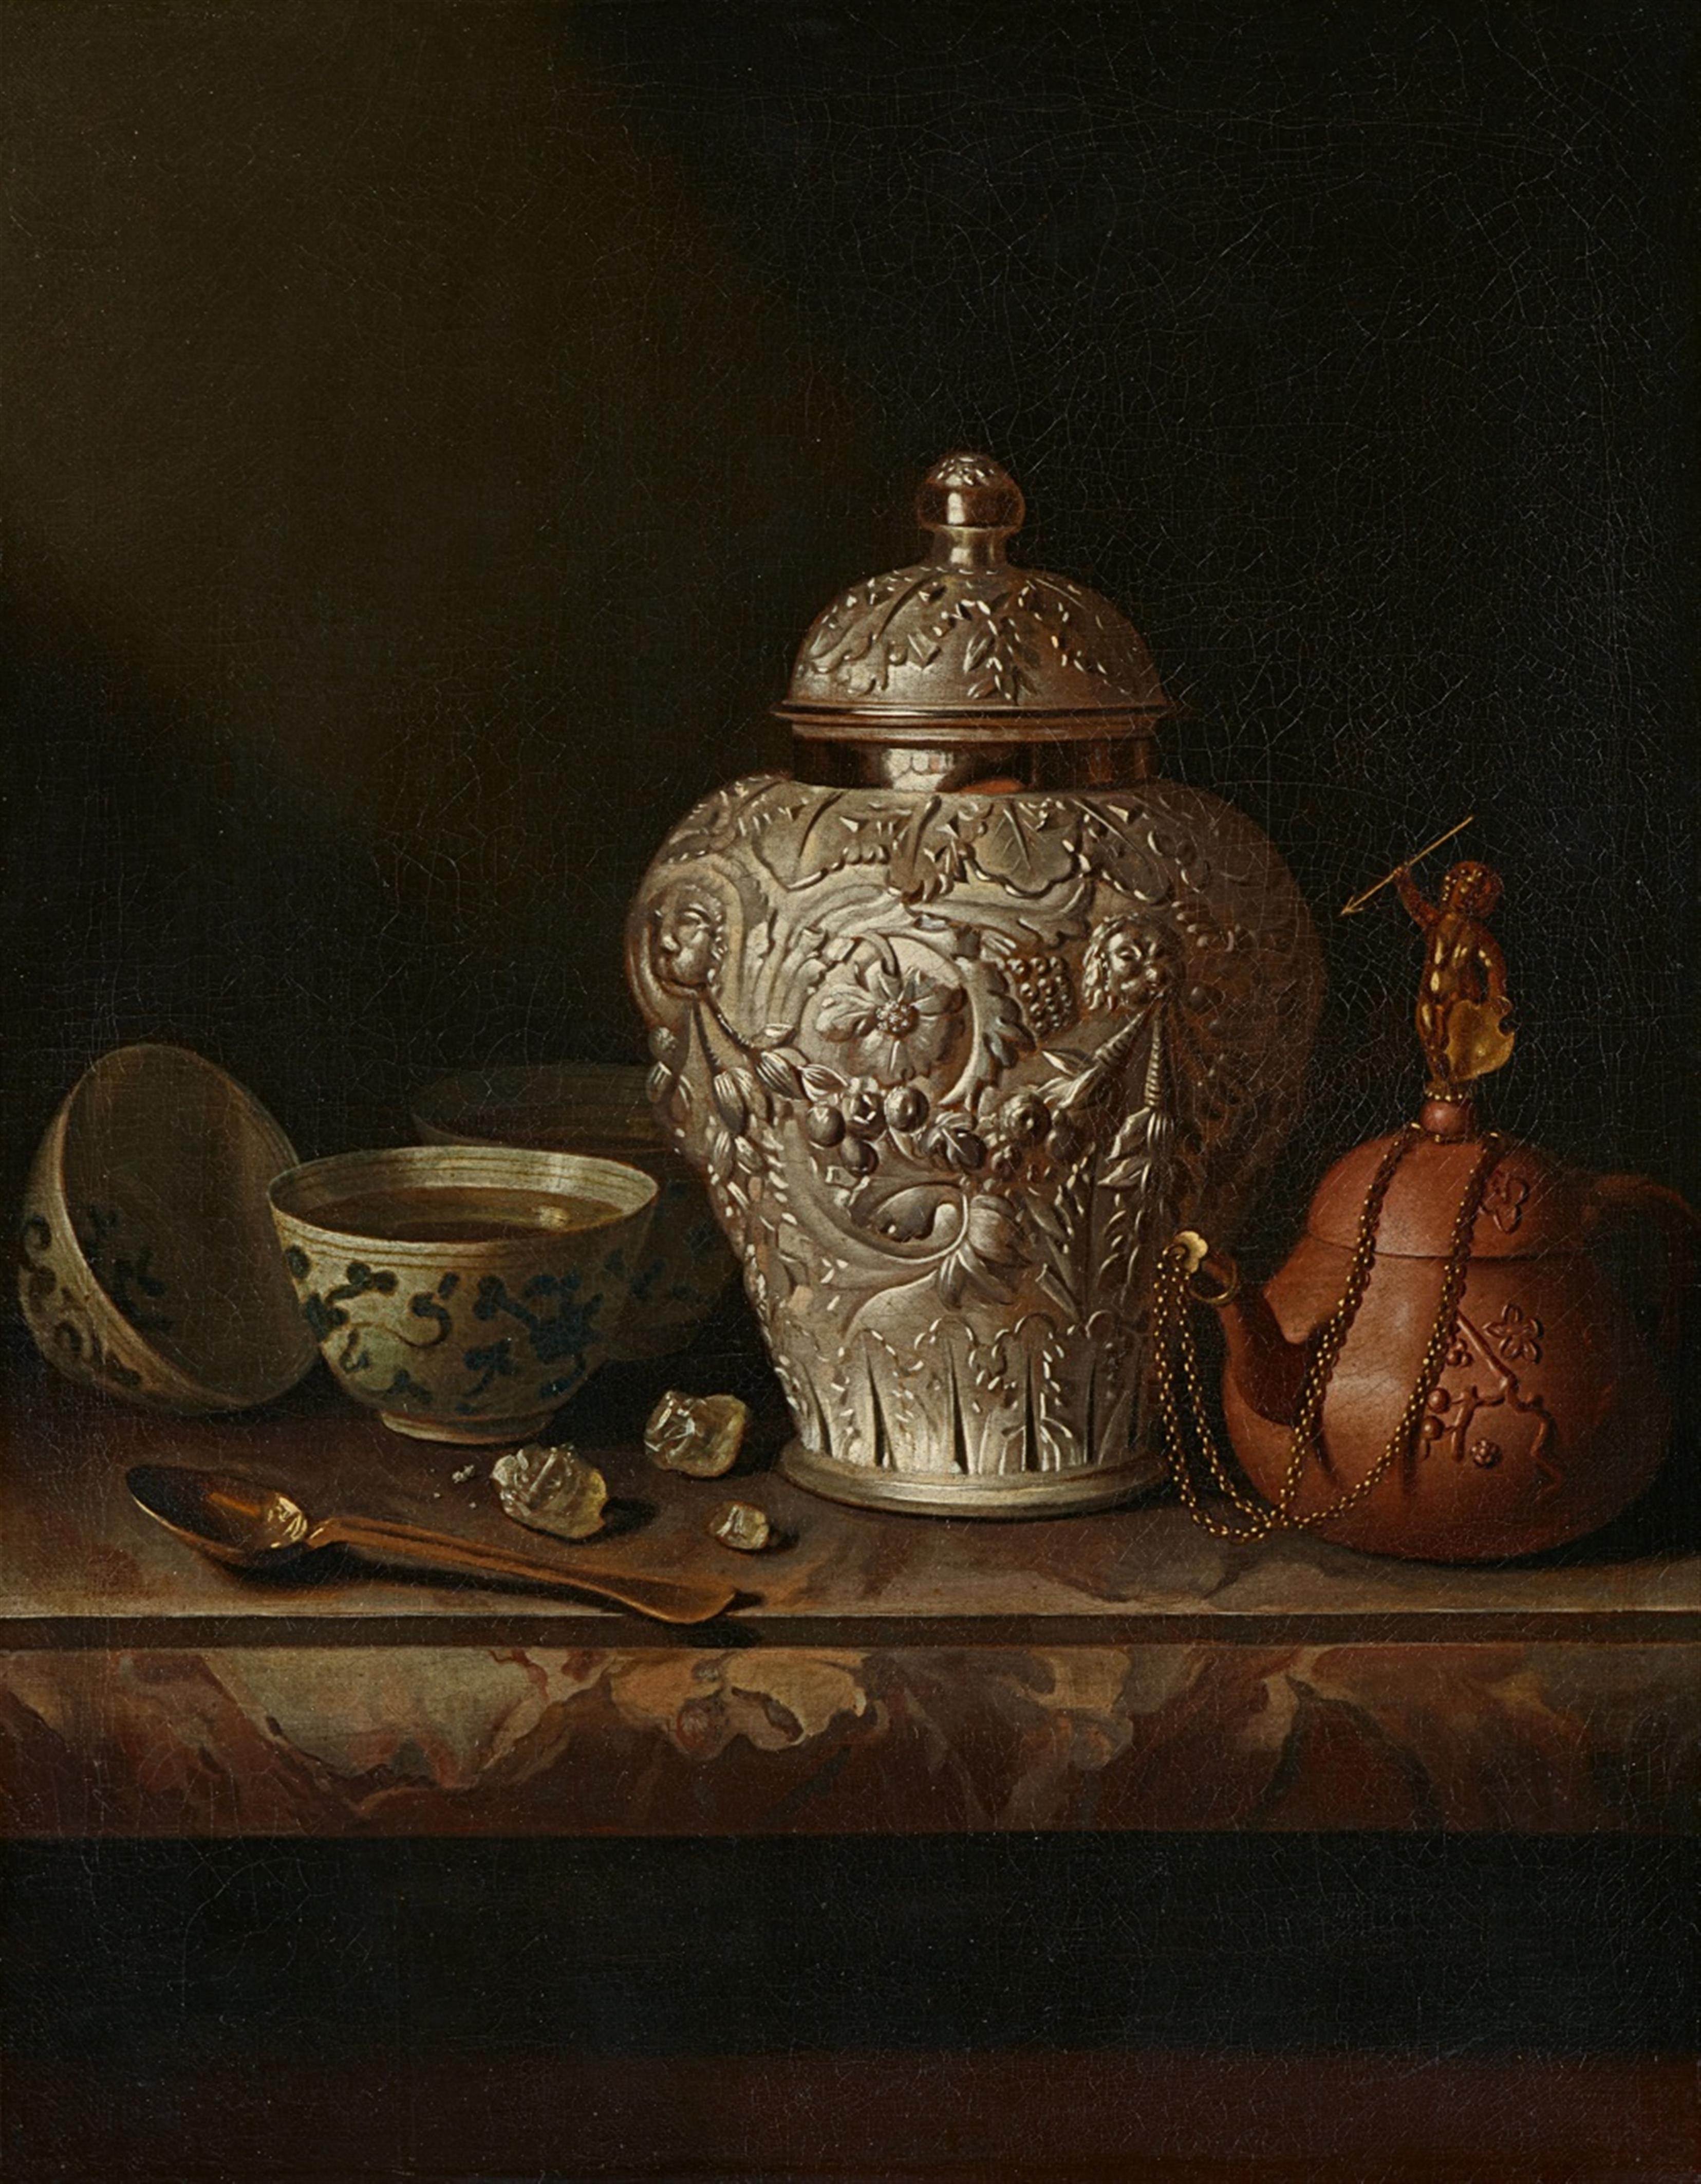 Pieter Gerritsz. van Roestraten - Still life with a Silver Ginger Jar and a Teapot on a Ledge